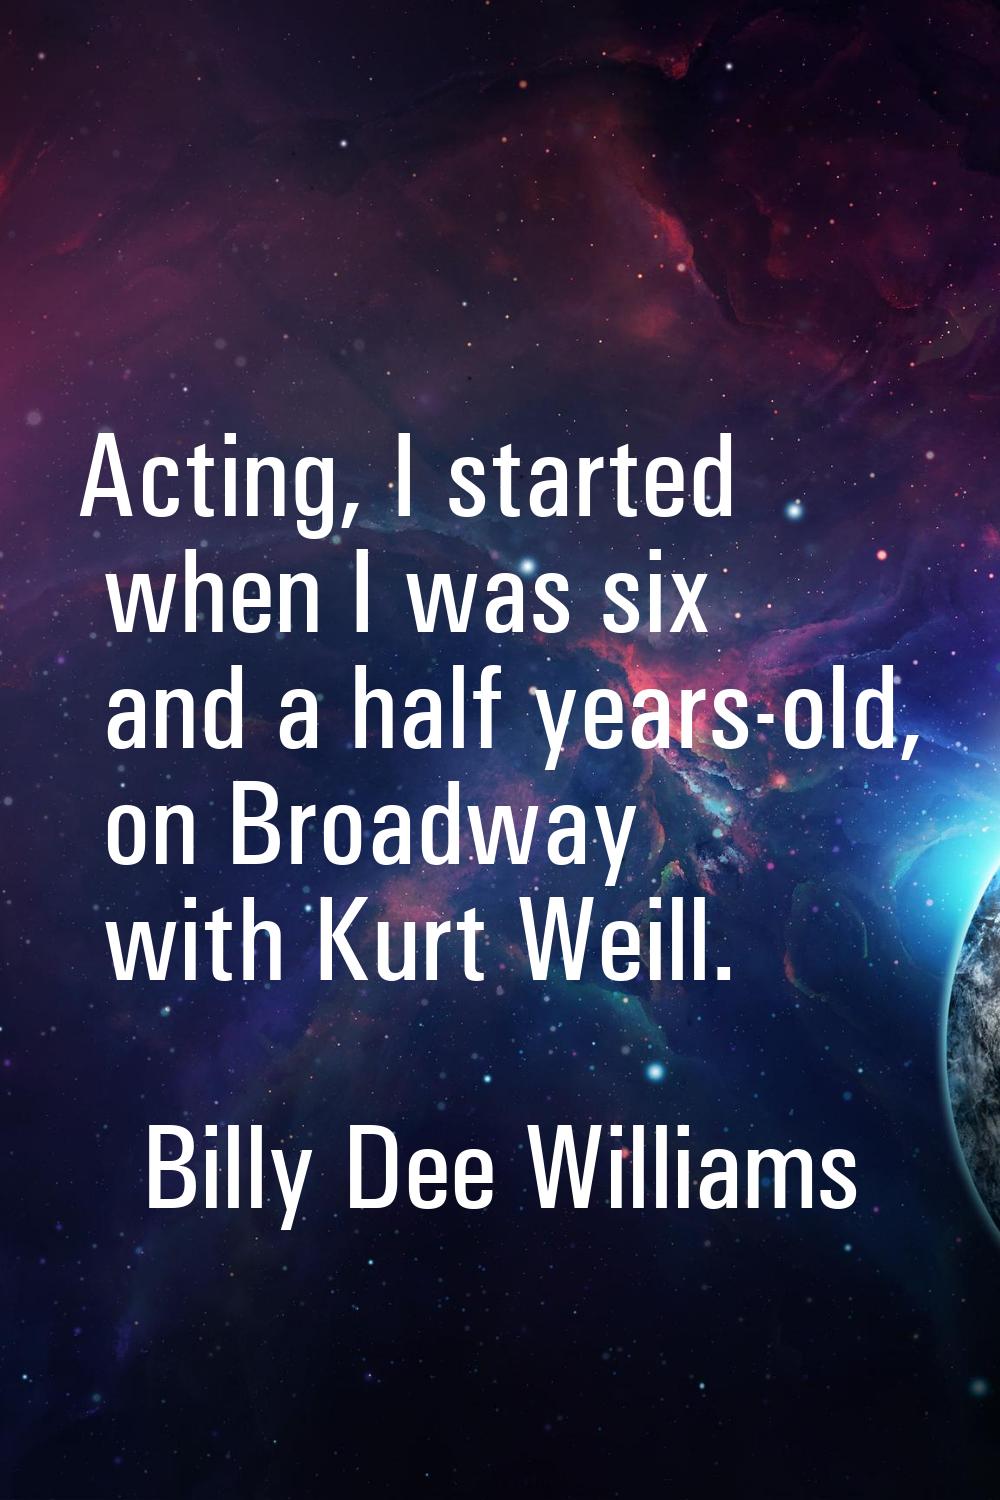 Acting, I started when I was six and a half years-old, on Broadway with Kurt Weill.